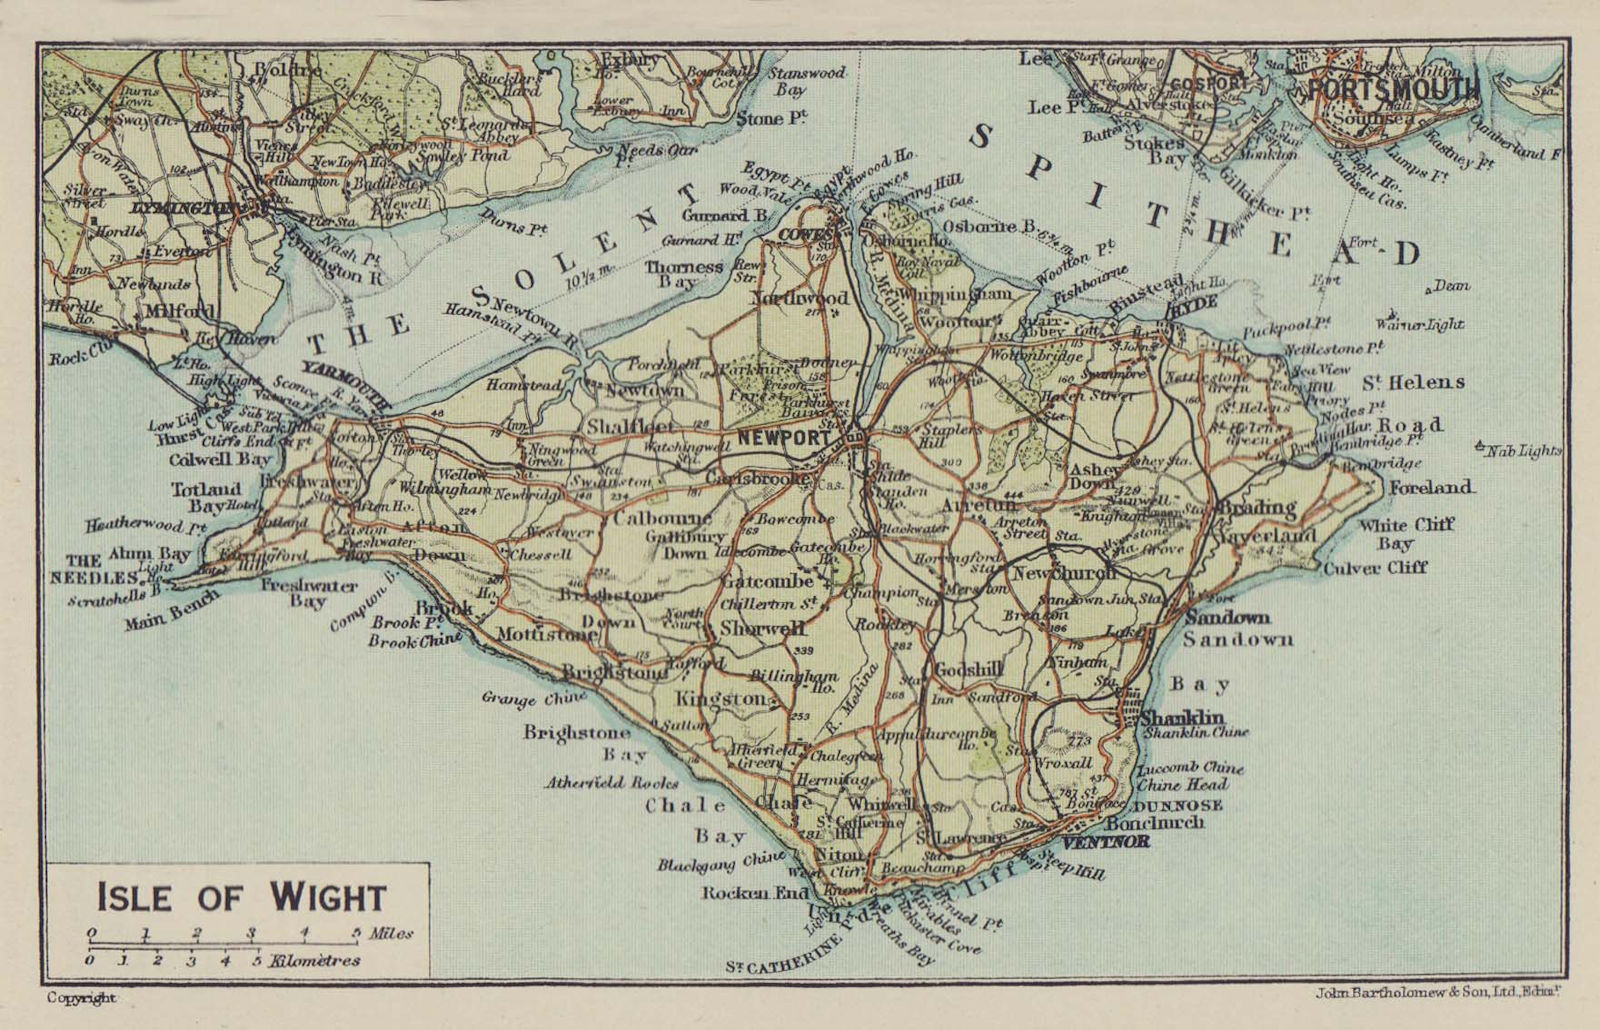 Associate Product Isle of Wight. Appears to show Solent rail bridge 1920 old antique map chart